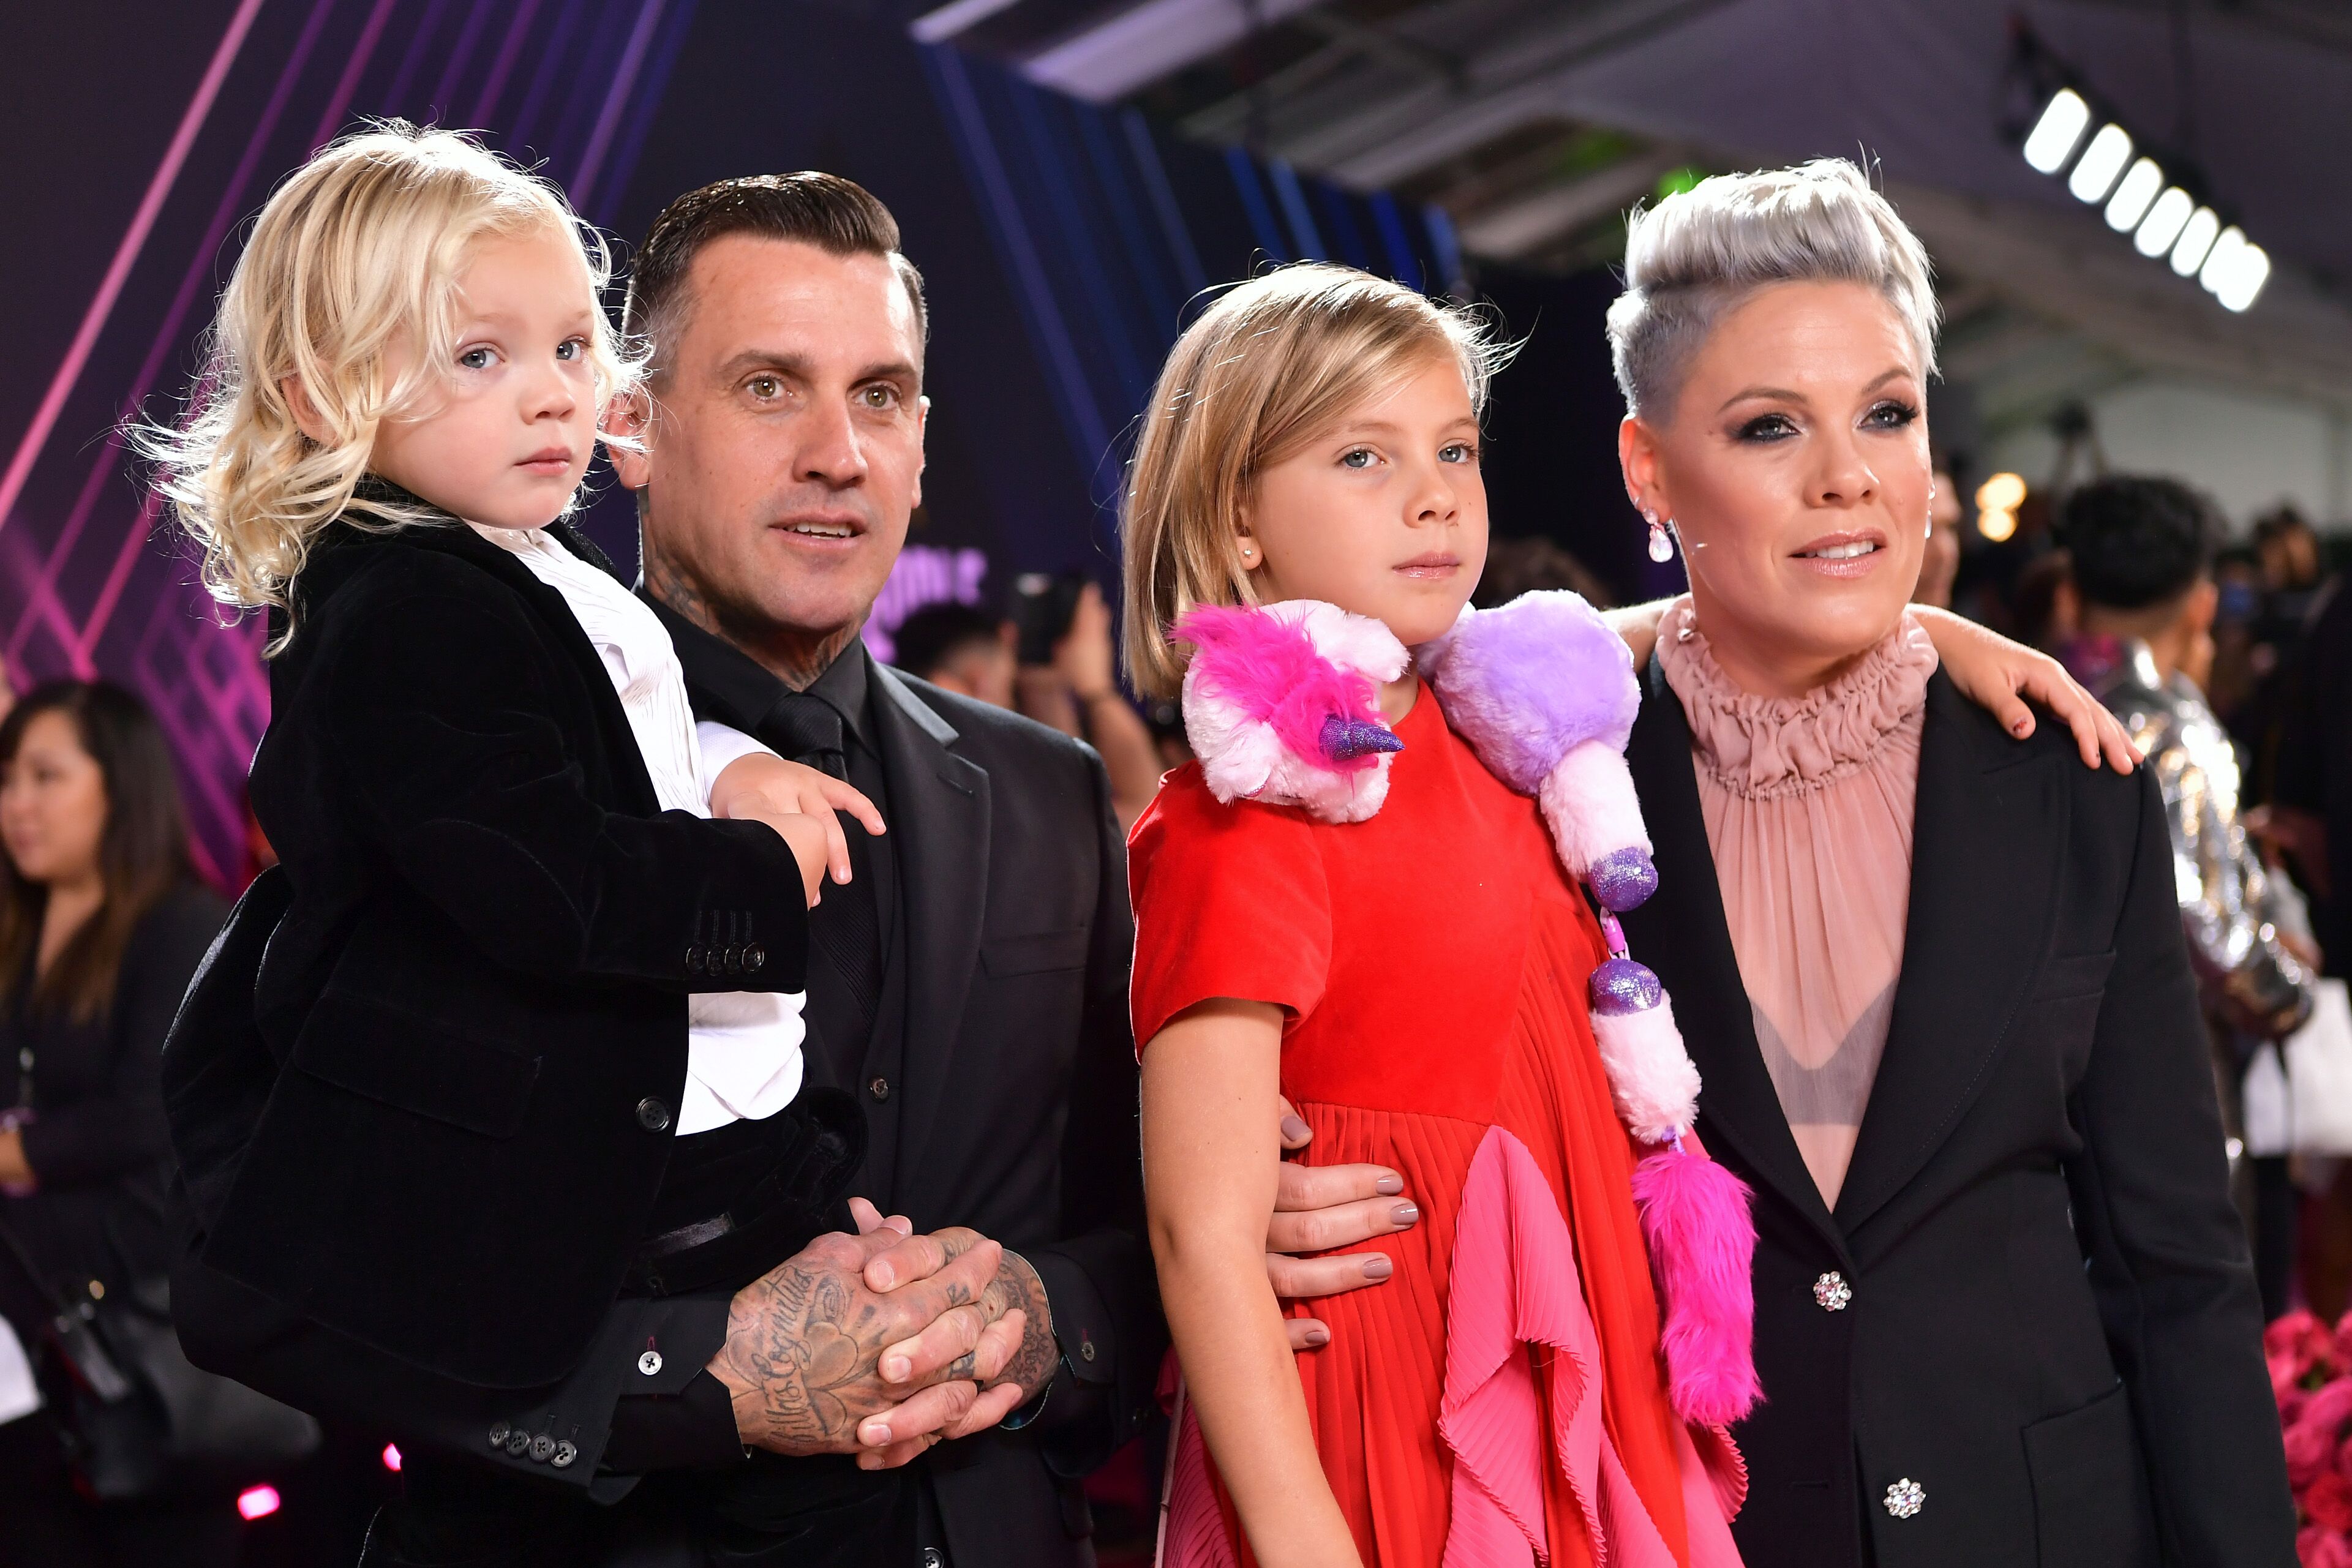 Jameson, Carey, Willow, and Pink at E! People's Choice Awards held at the Barker Hangar on November 10, 2019 | Photo: Emma McIntyre/E! Entertainment/NBCU Photo Bank via Getty Images